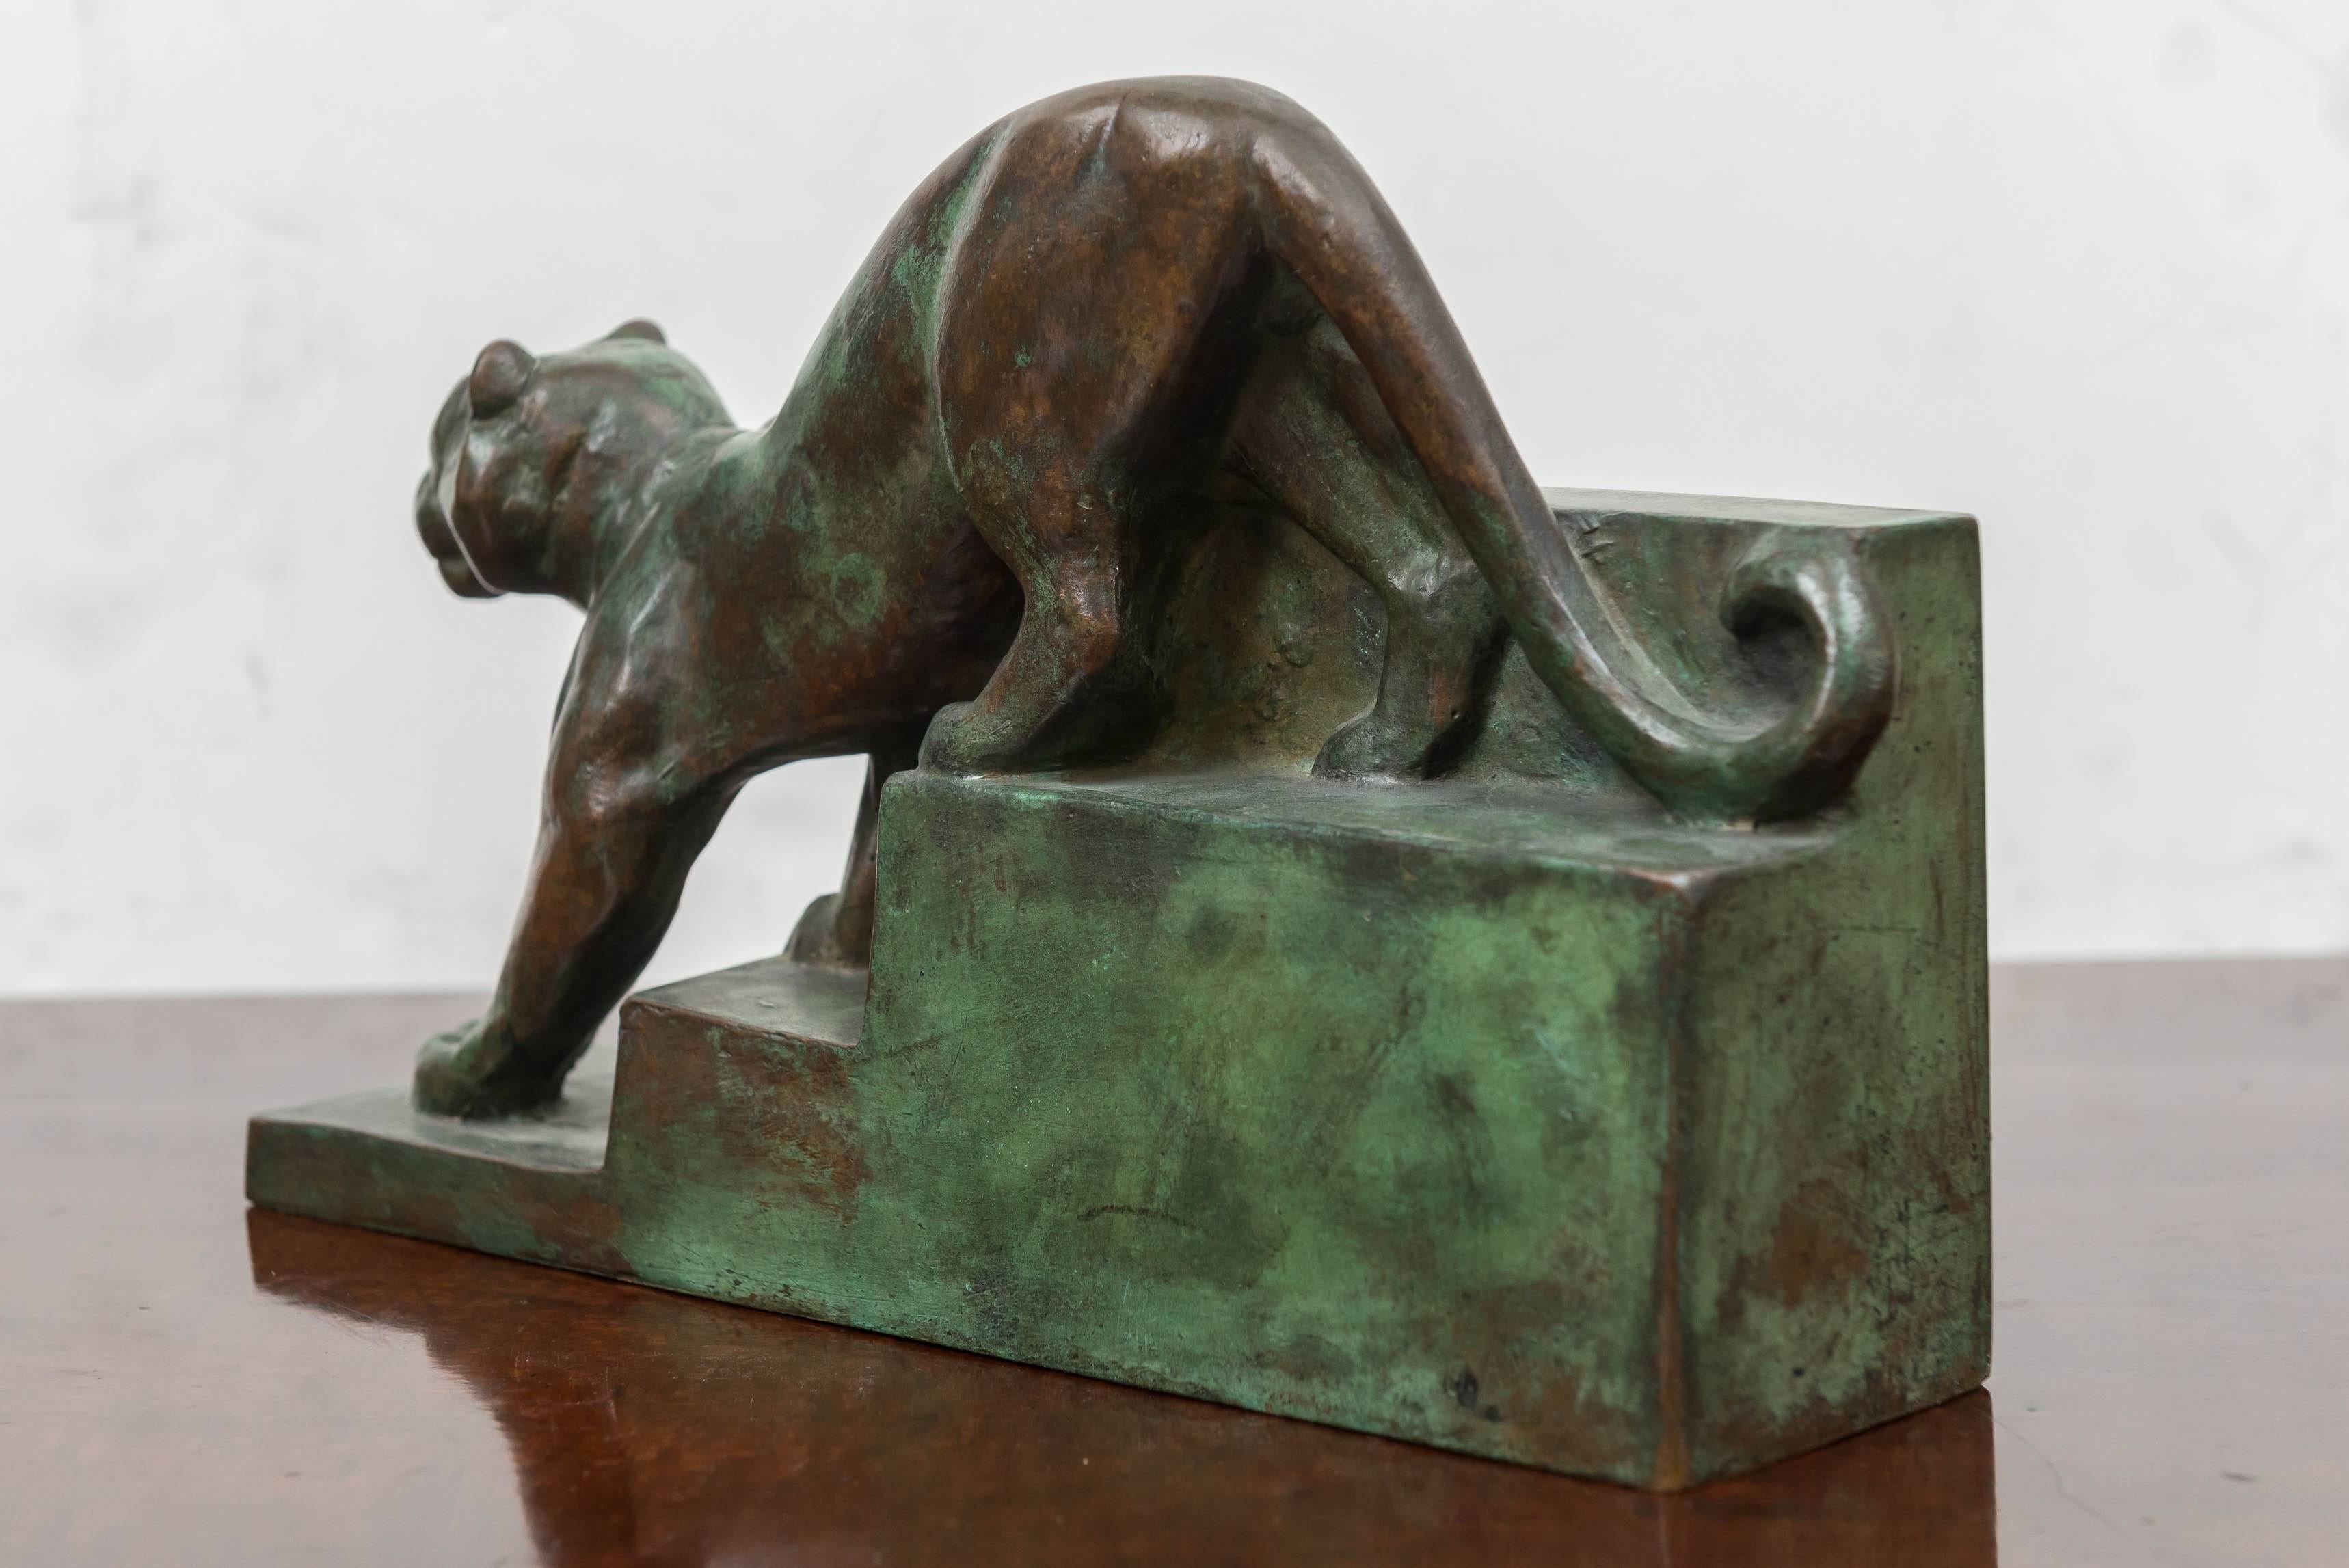 French bronze sculpture of a jaguar by J. Andr'e, Paris, circa 1925
Retains the old worn, partial verdigris and warm bronze surface patina.
A bold depiction of a Jaguar descending a stepped base. Stylized expressionist, Art Deco powerful lines and